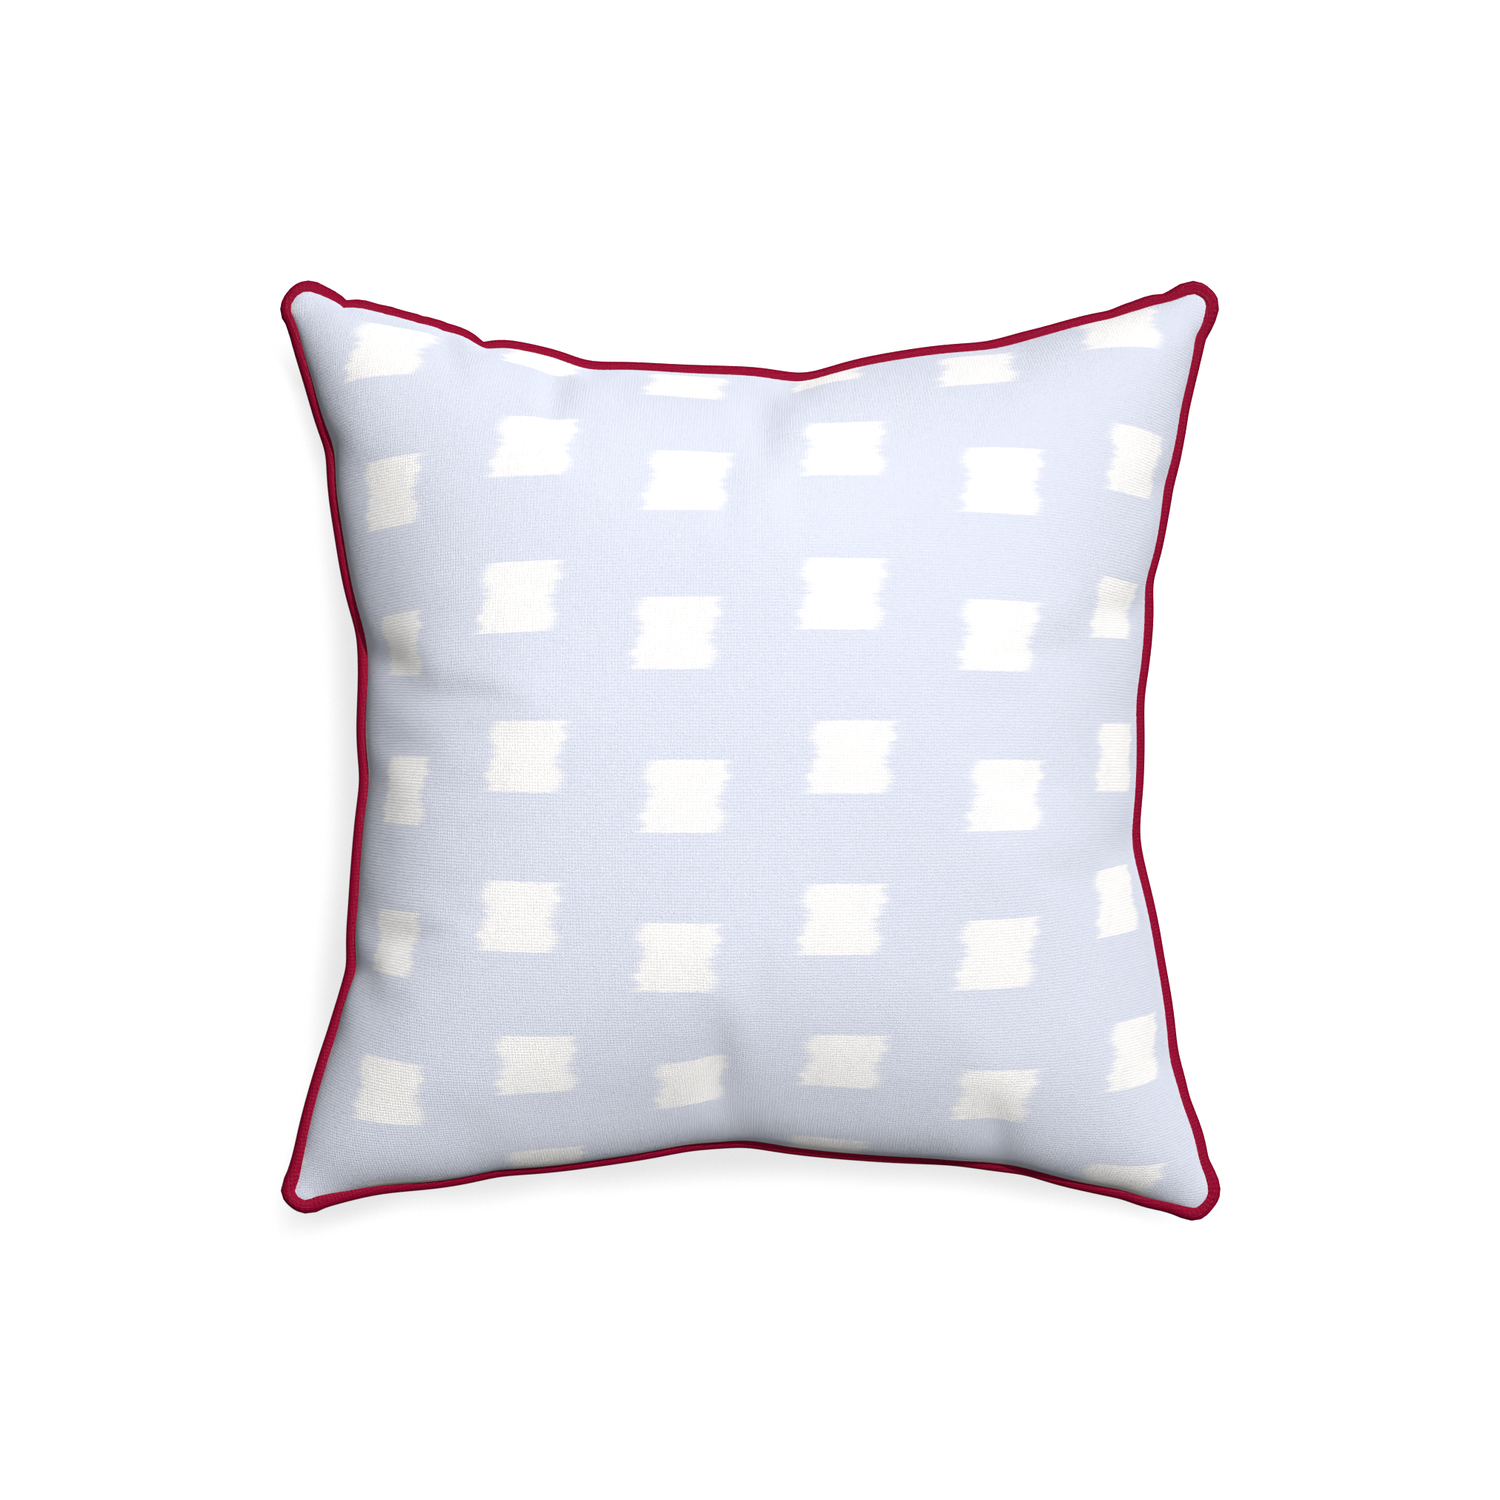 20-square denton custom pillow with raspberry piping on white background